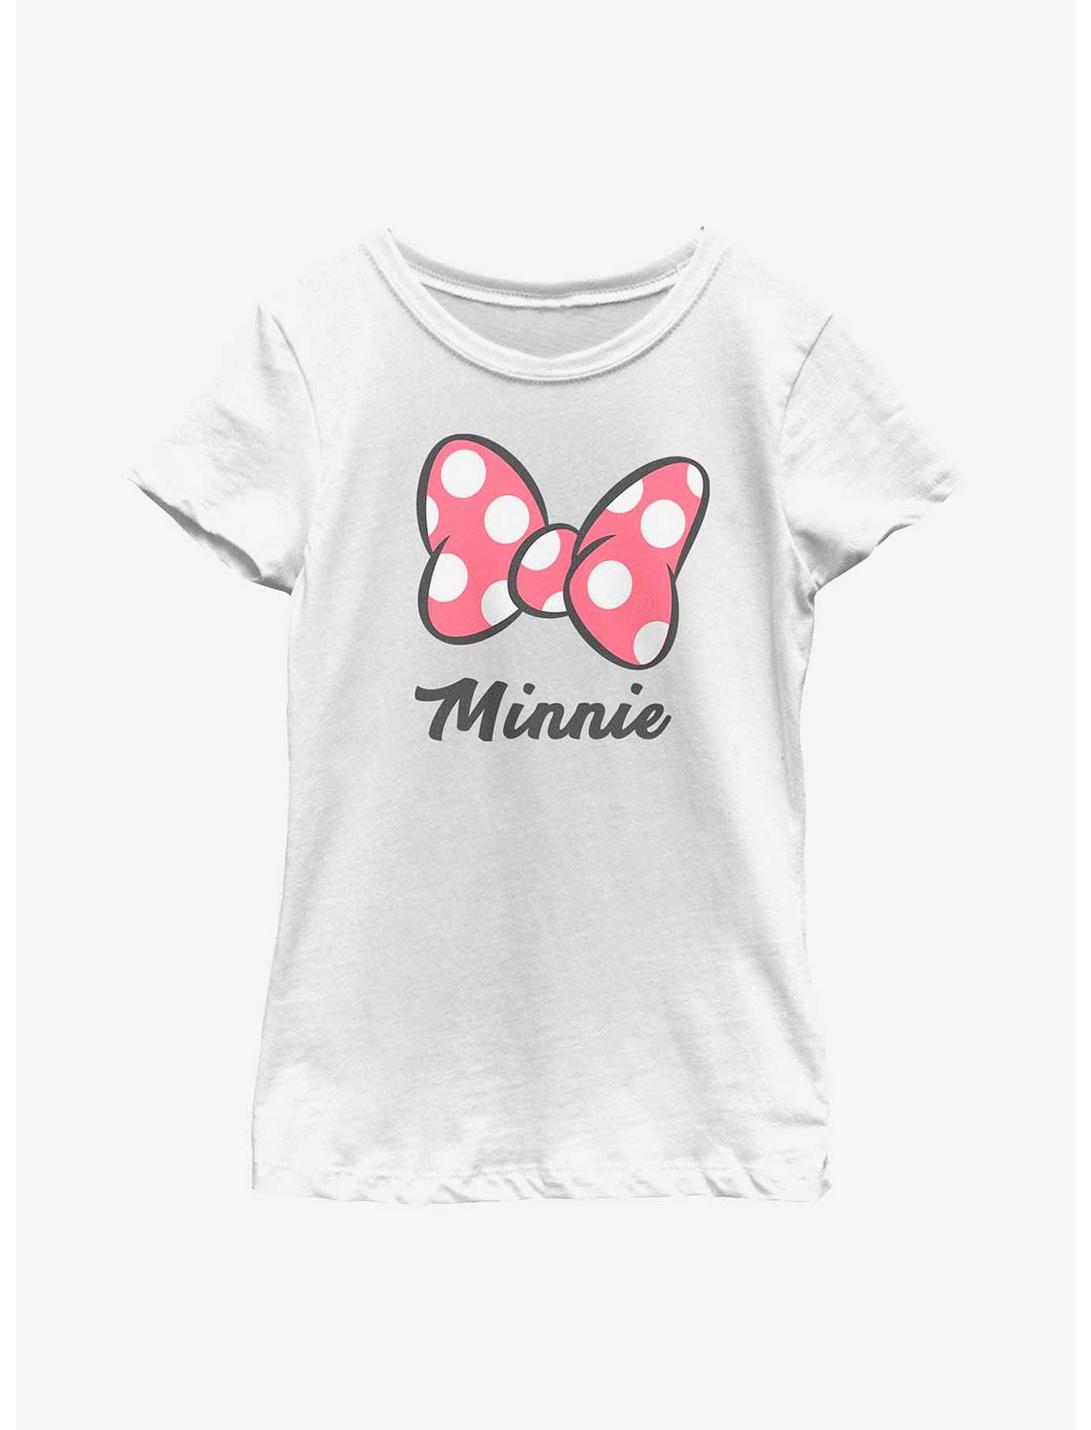 Disney Minnie Mouse Giant Bow Youth Girls T-Shirt, WHITE, hi-res